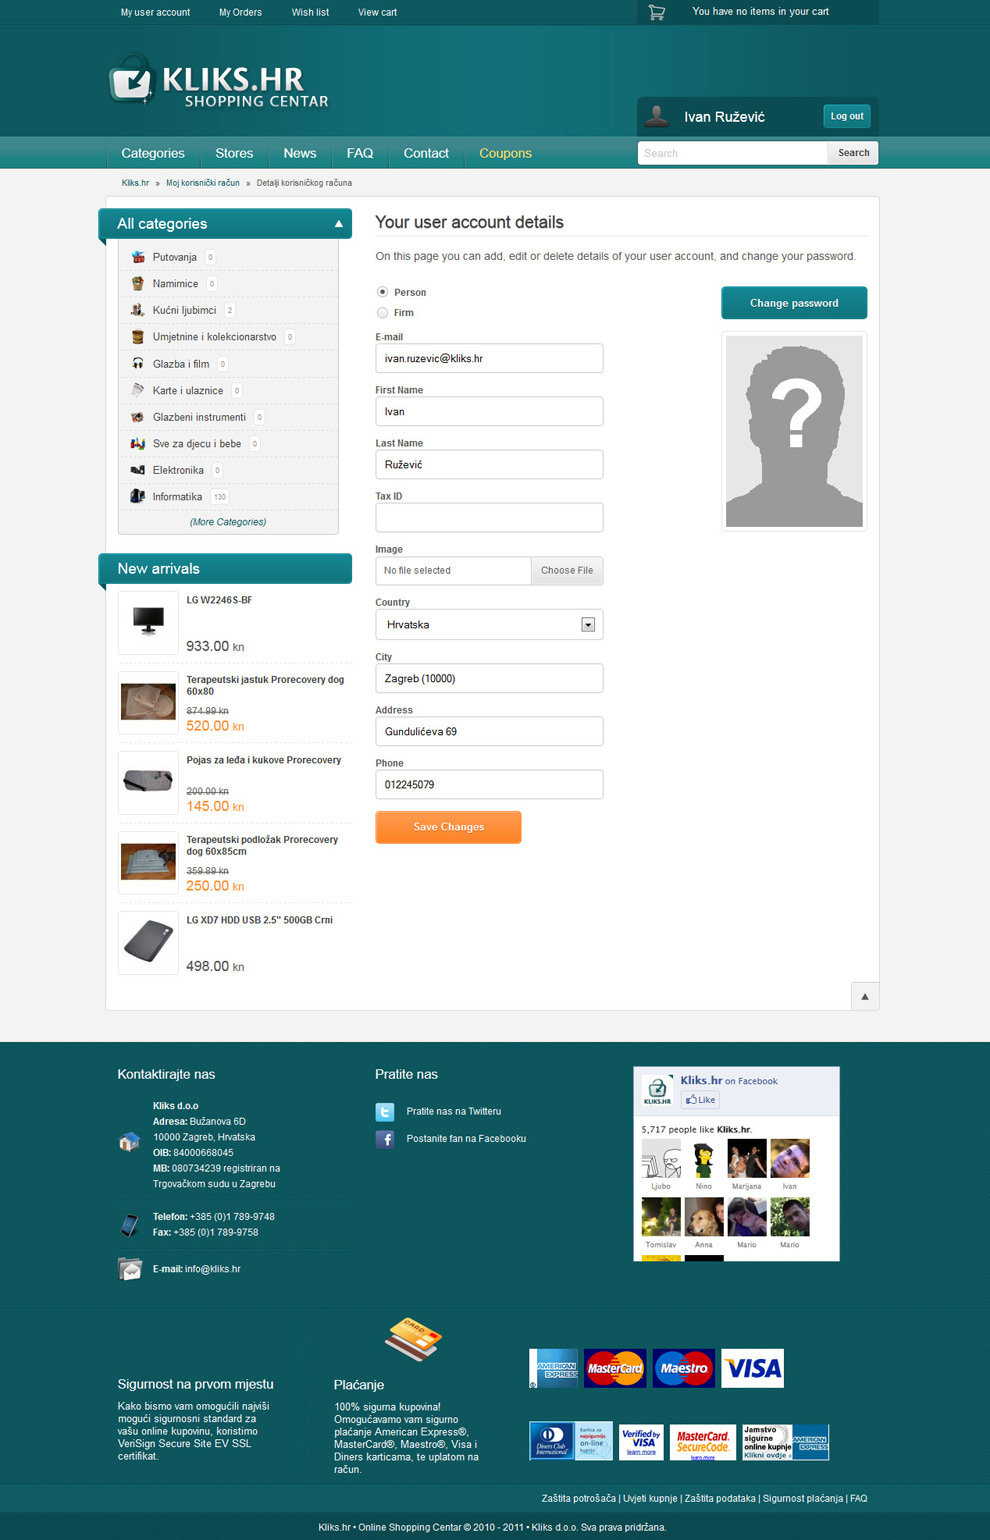 User details page